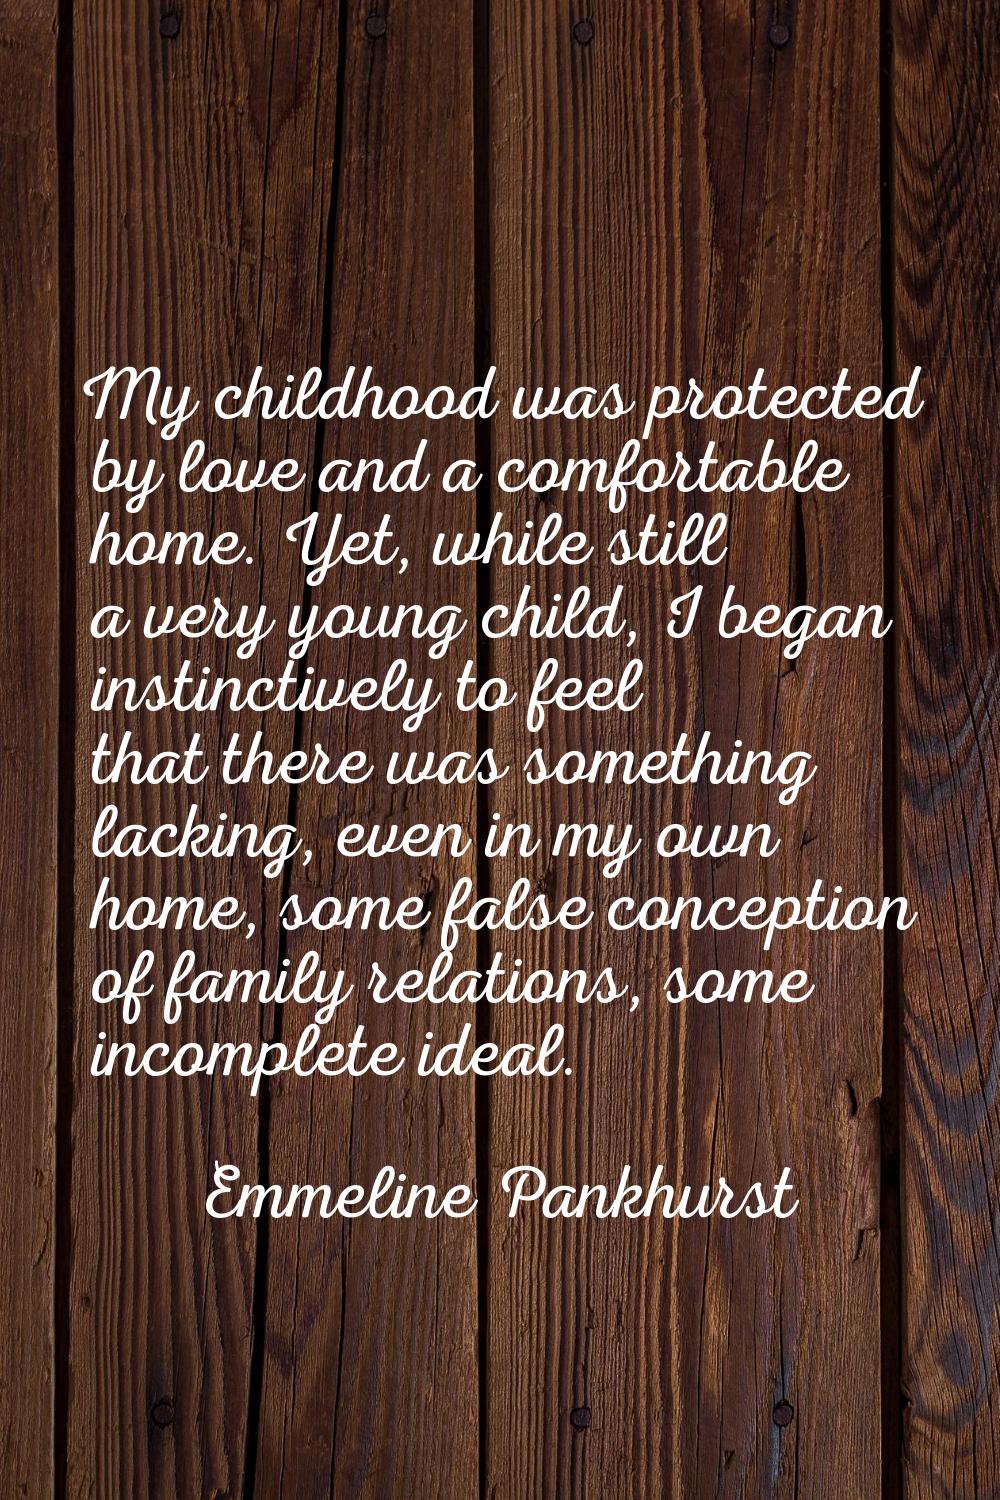 My childhood was protected by love and a comfortable home. Yet, while still a very young child, I b